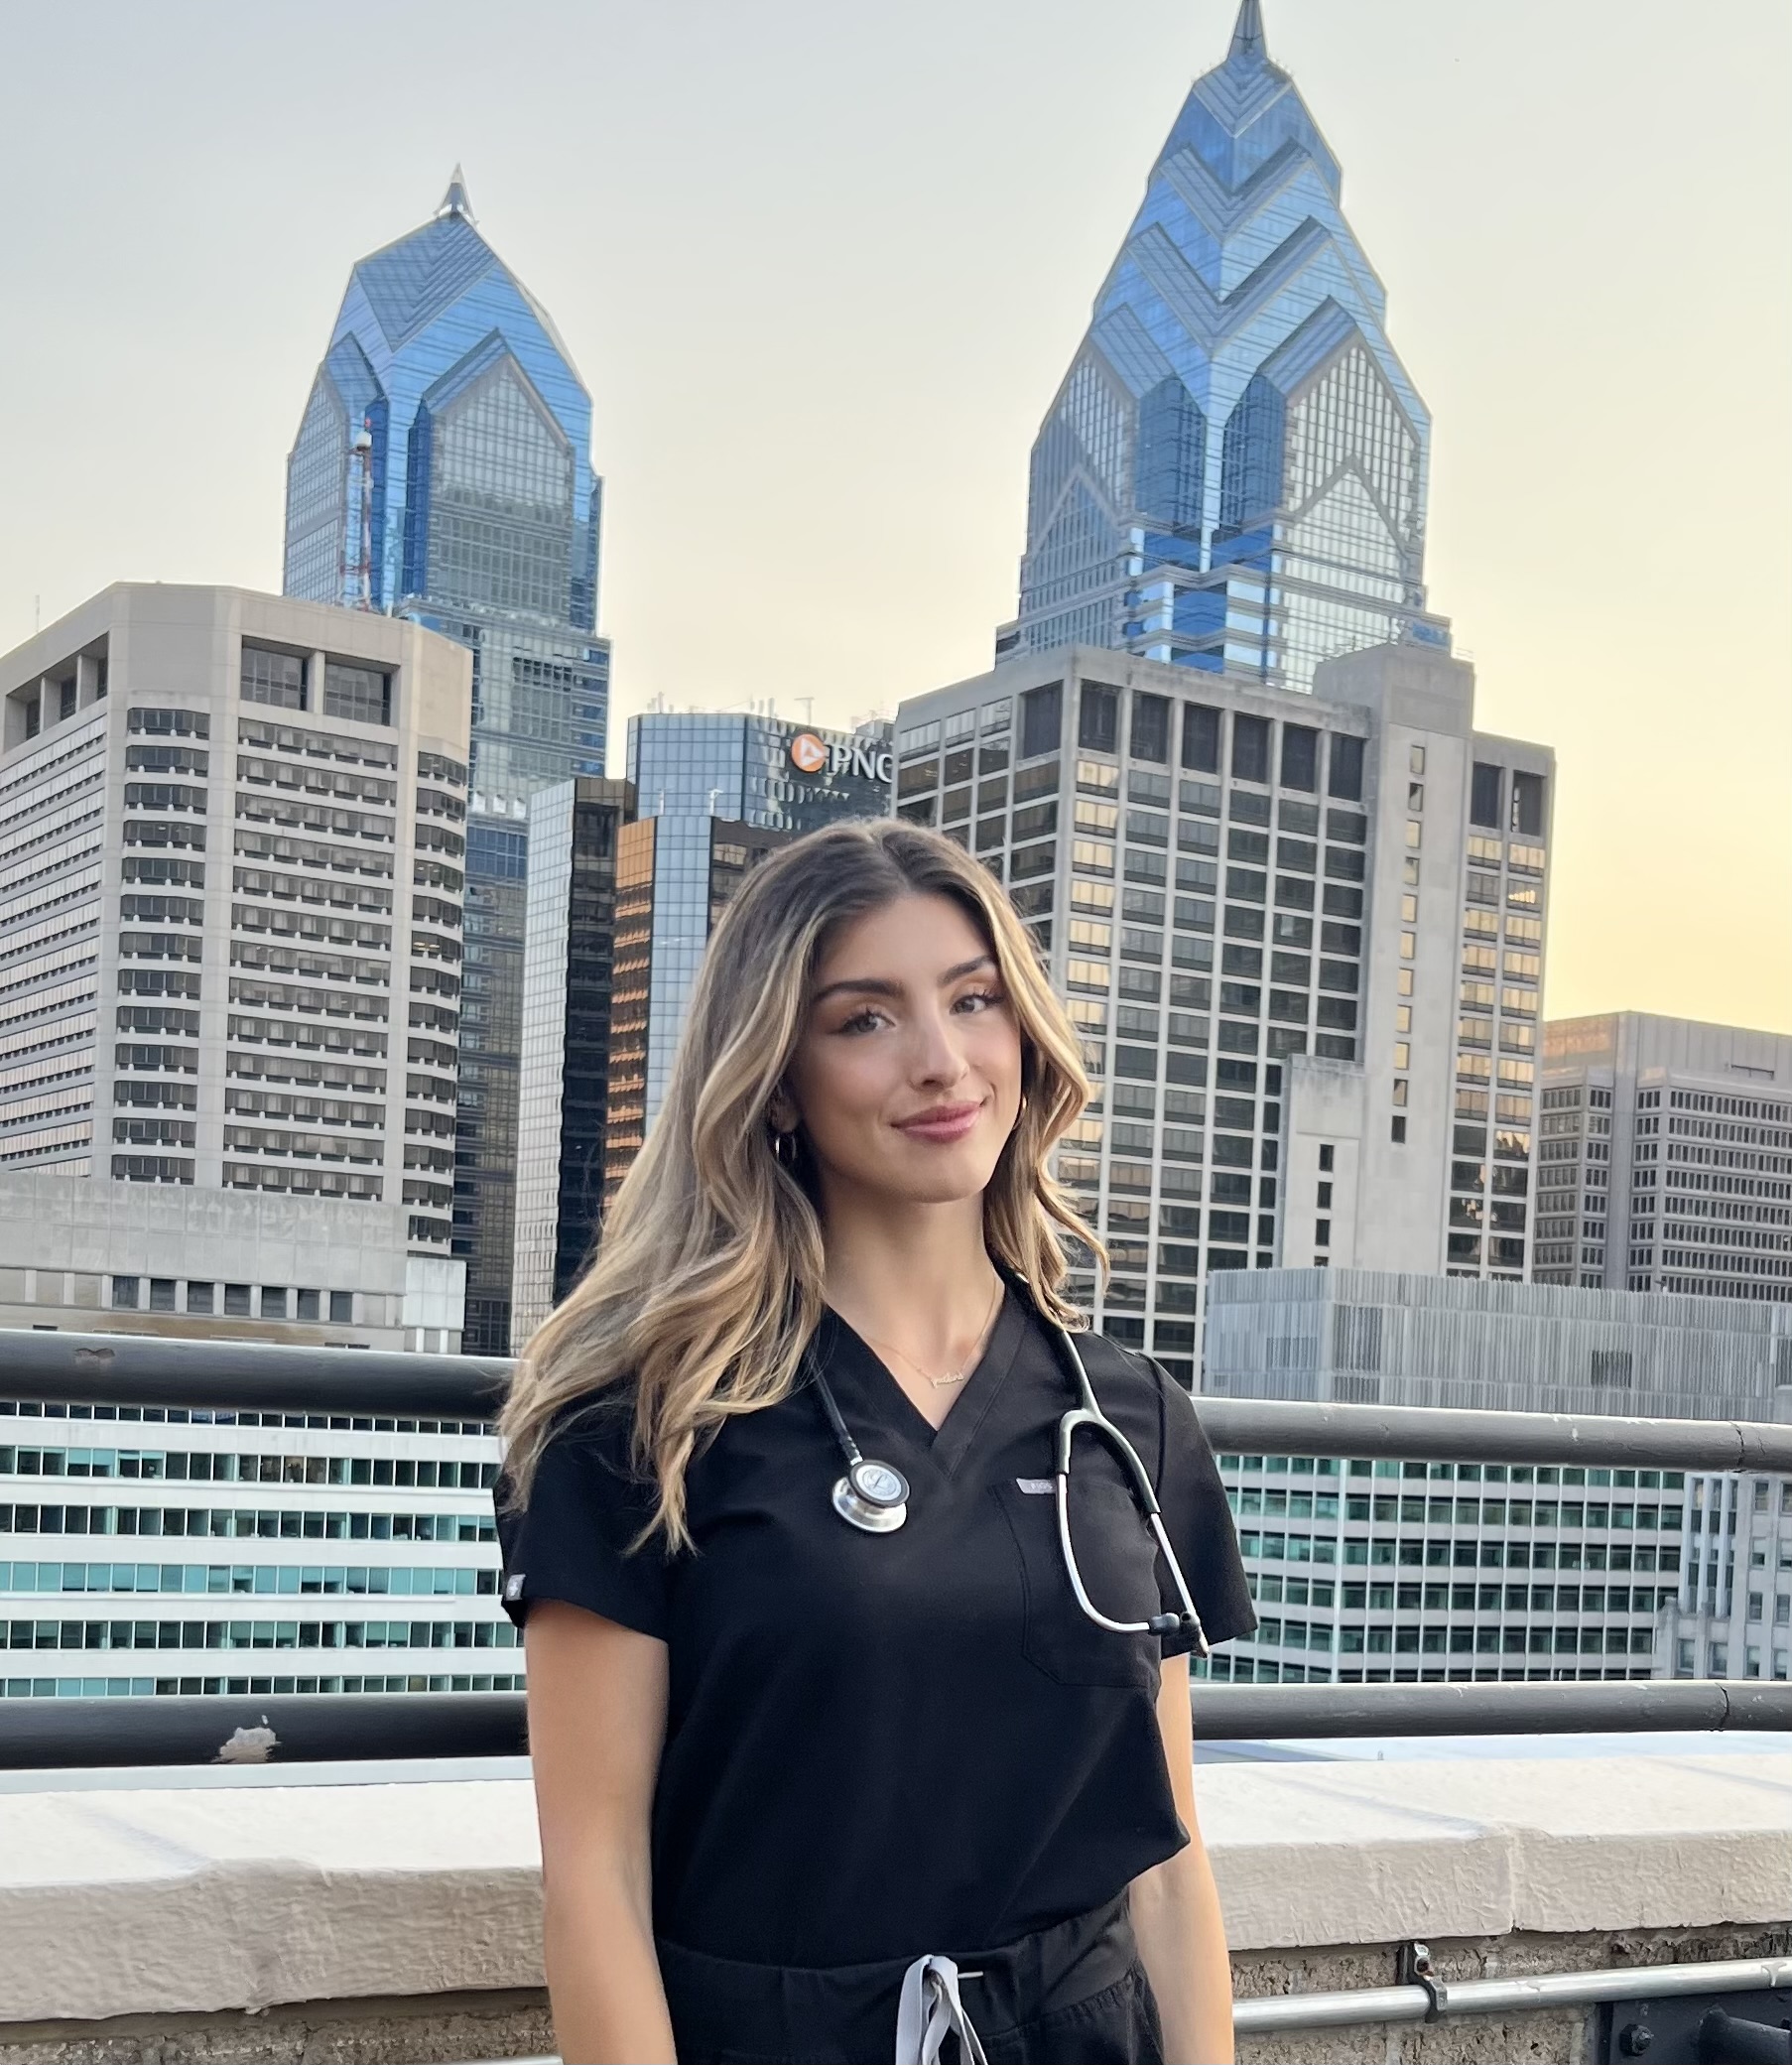 PA Student Cassie Job wearing black scrubs with stethoscope draped around her neck, long blond hair over her shoulders, standing on a bridge with Philadelphia city skyline in the background